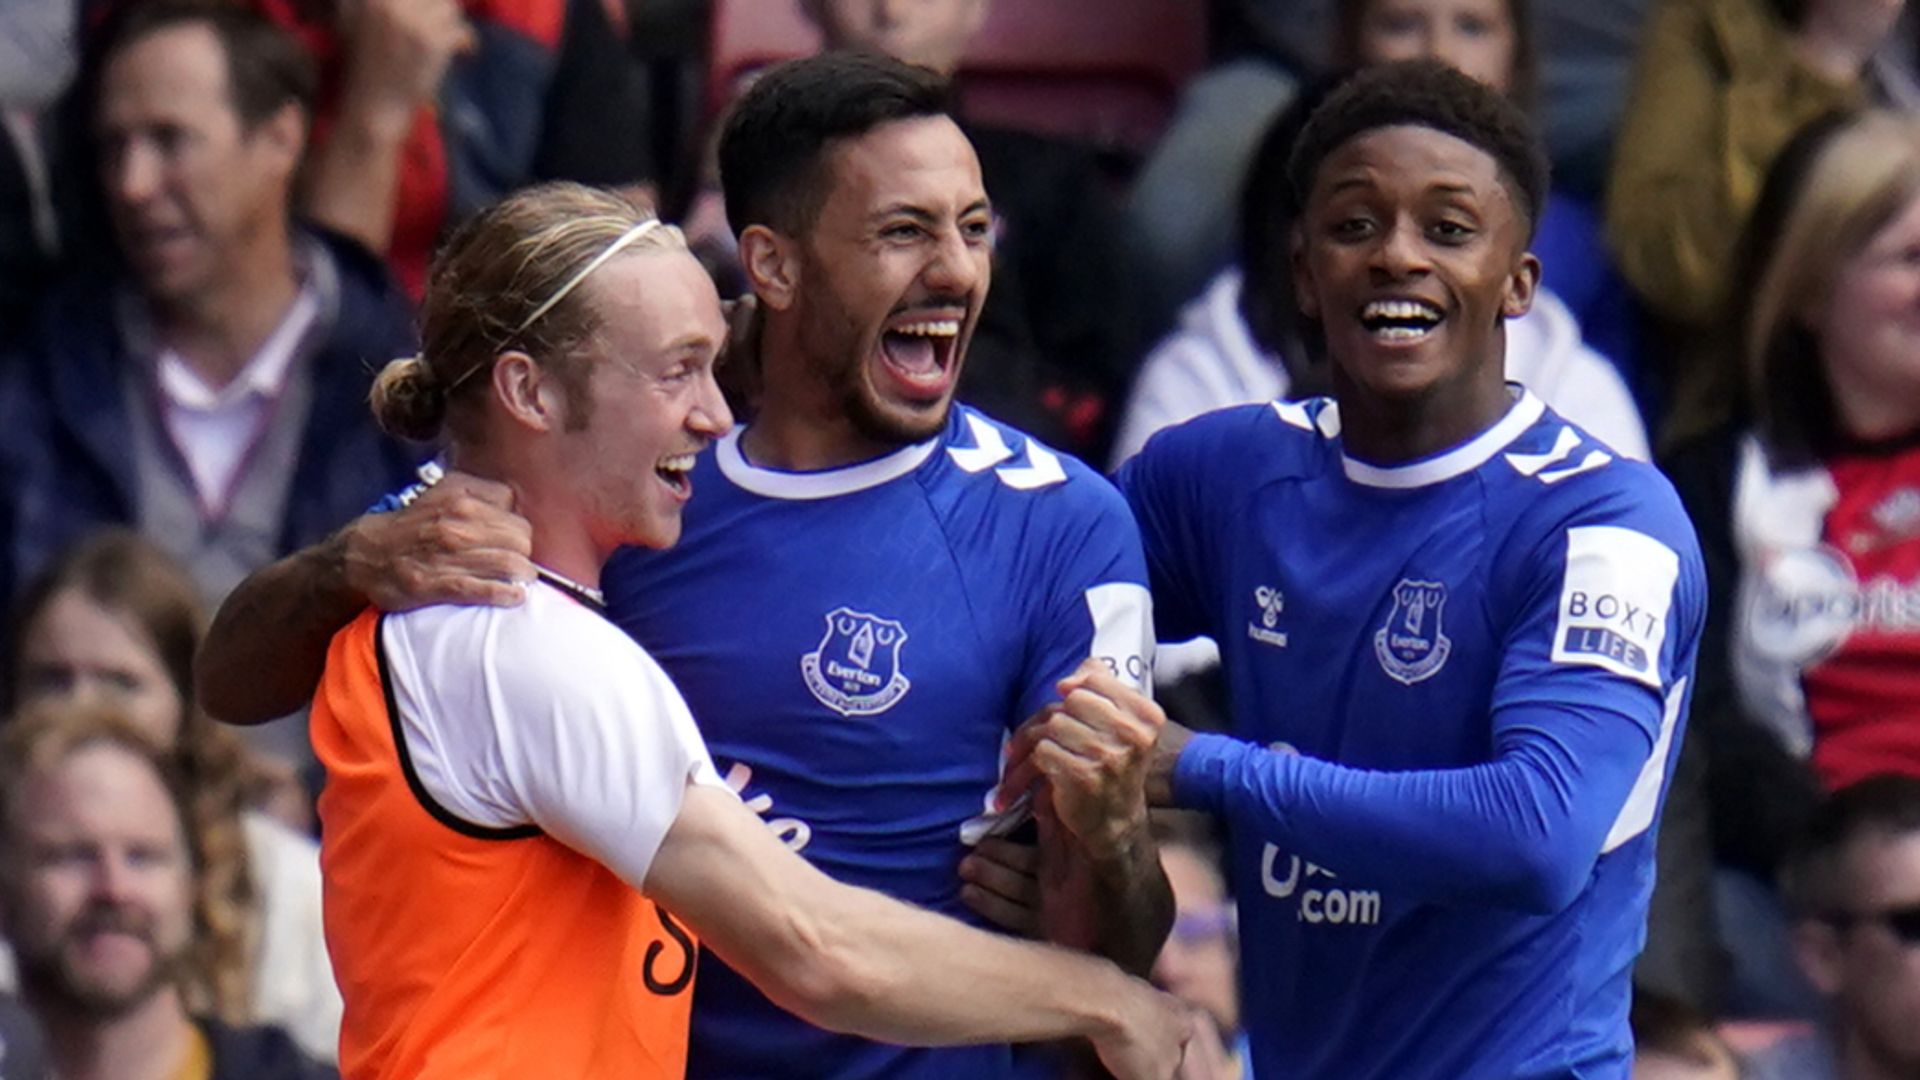 Everton come from behind to beat Saints and make it back-to-back wins